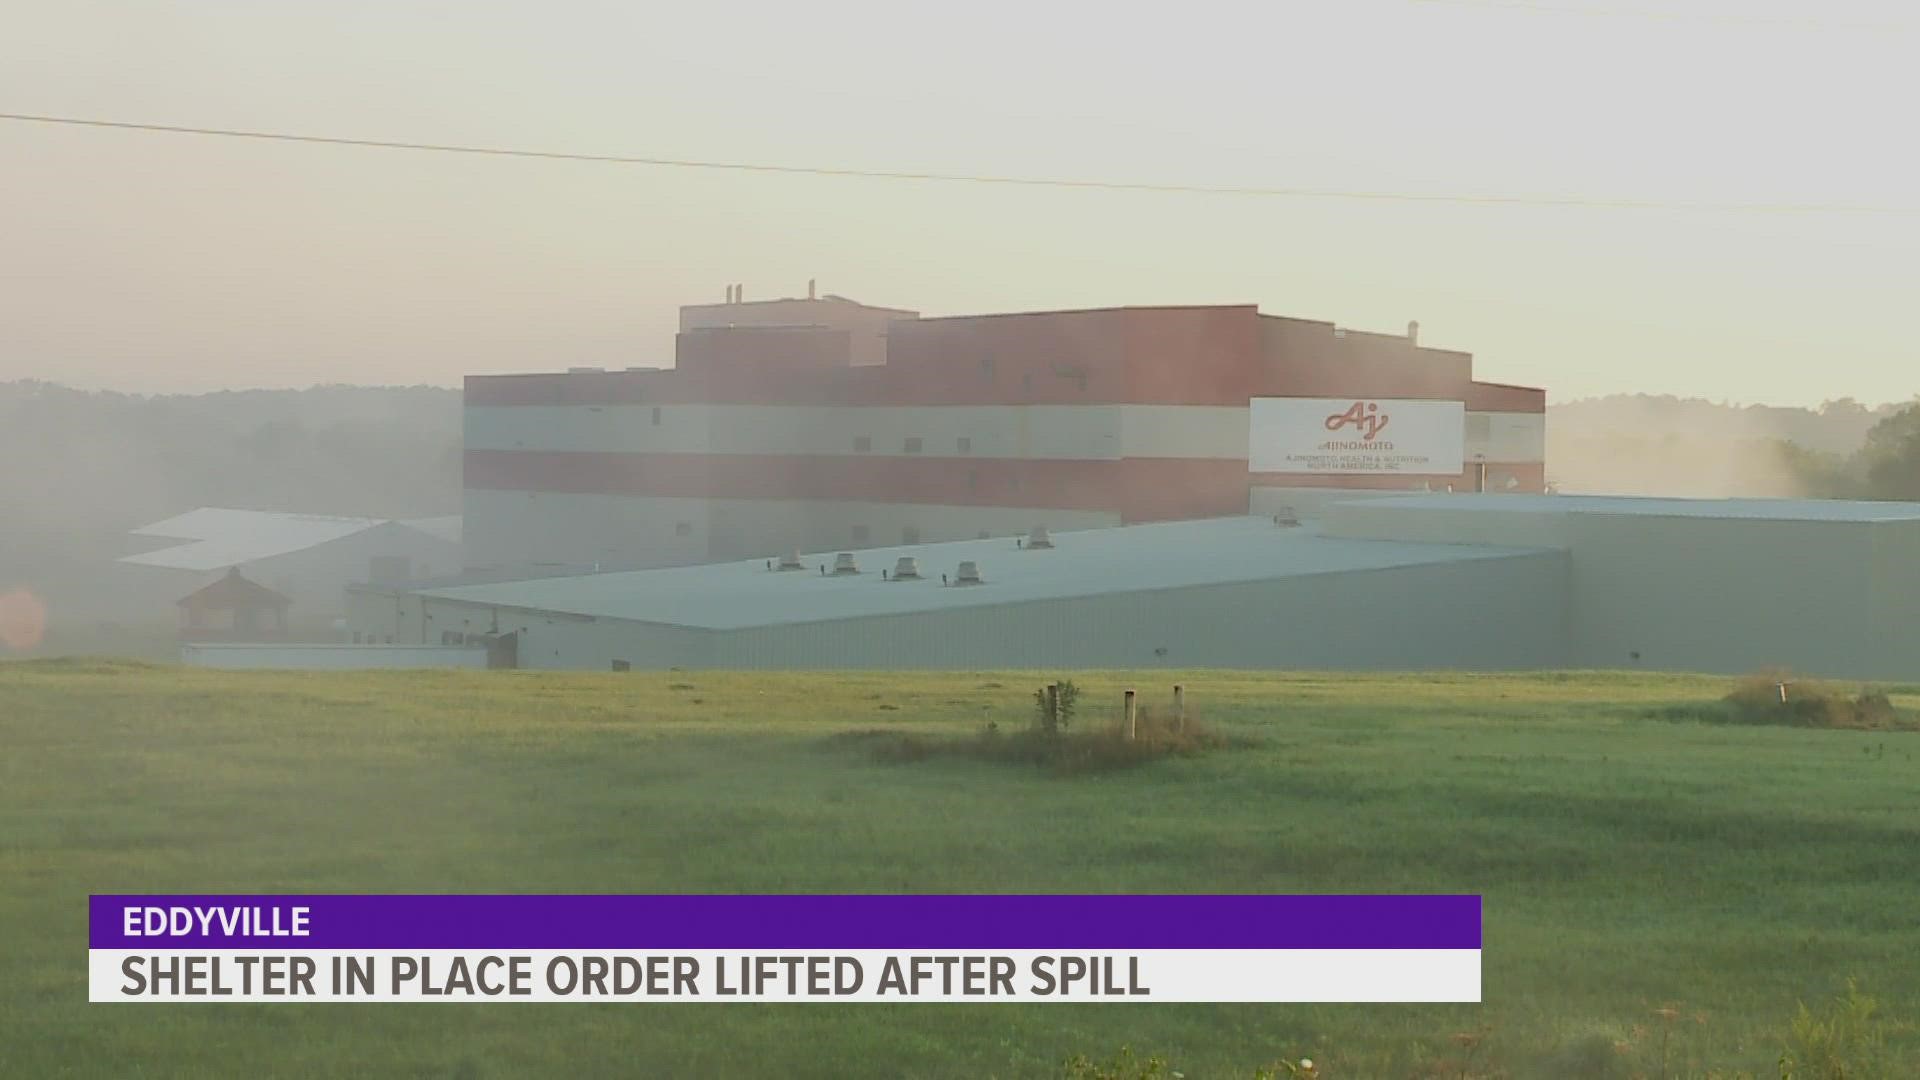 The scene has been cleared after an acid leak at the Ajinomoto plant outside of Eddyville Wednesday night, according to the Wapello County Sheriff's Office.